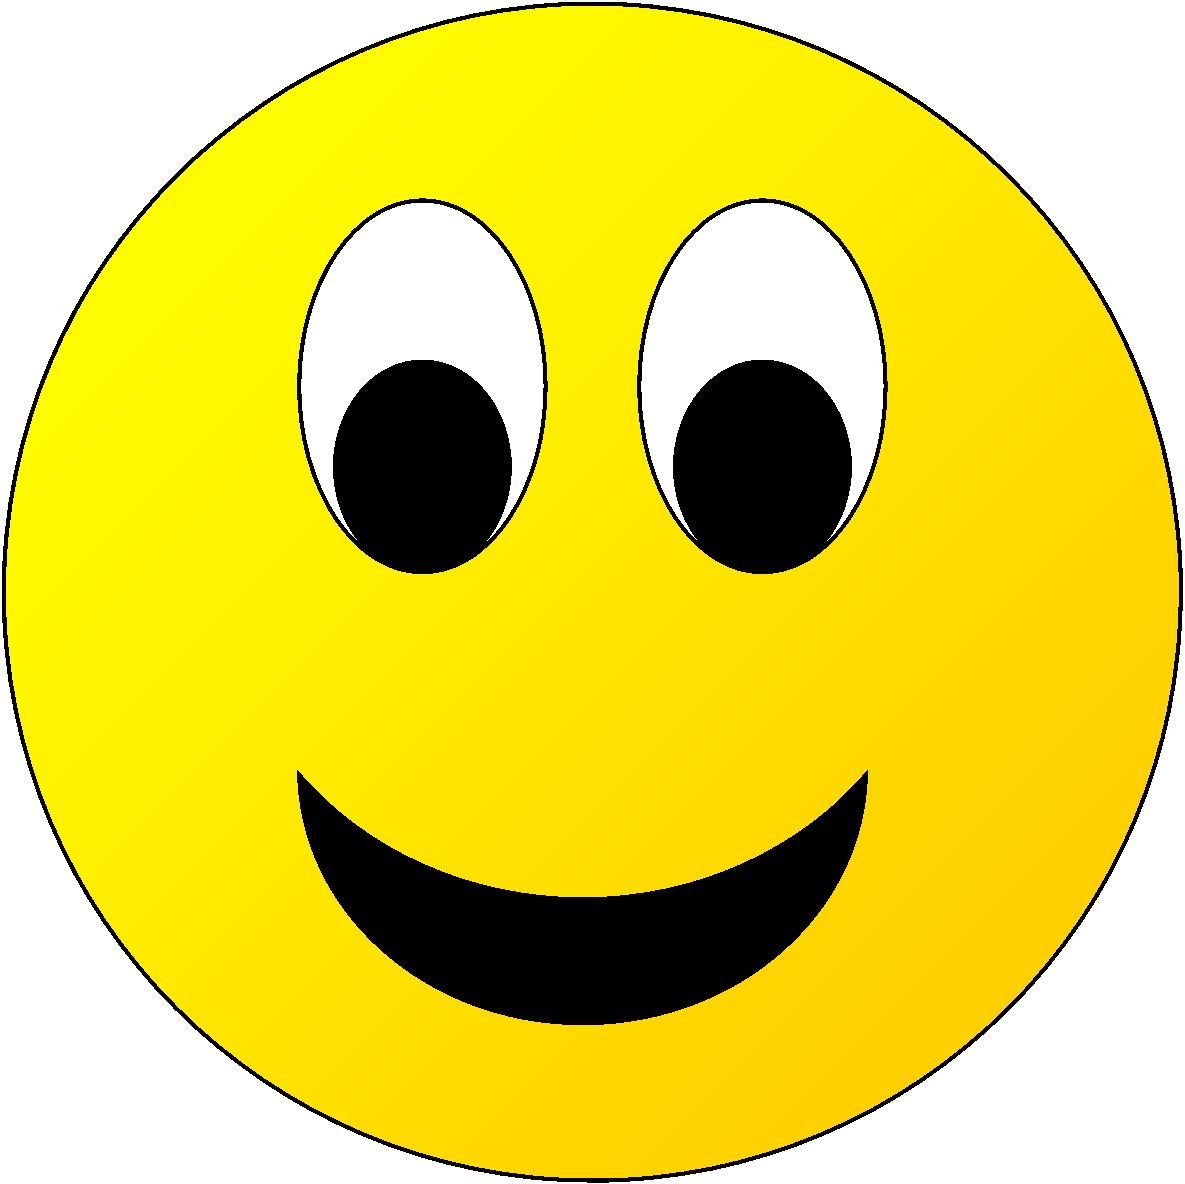 Funny Smiley Faces Animation   Clipart Best